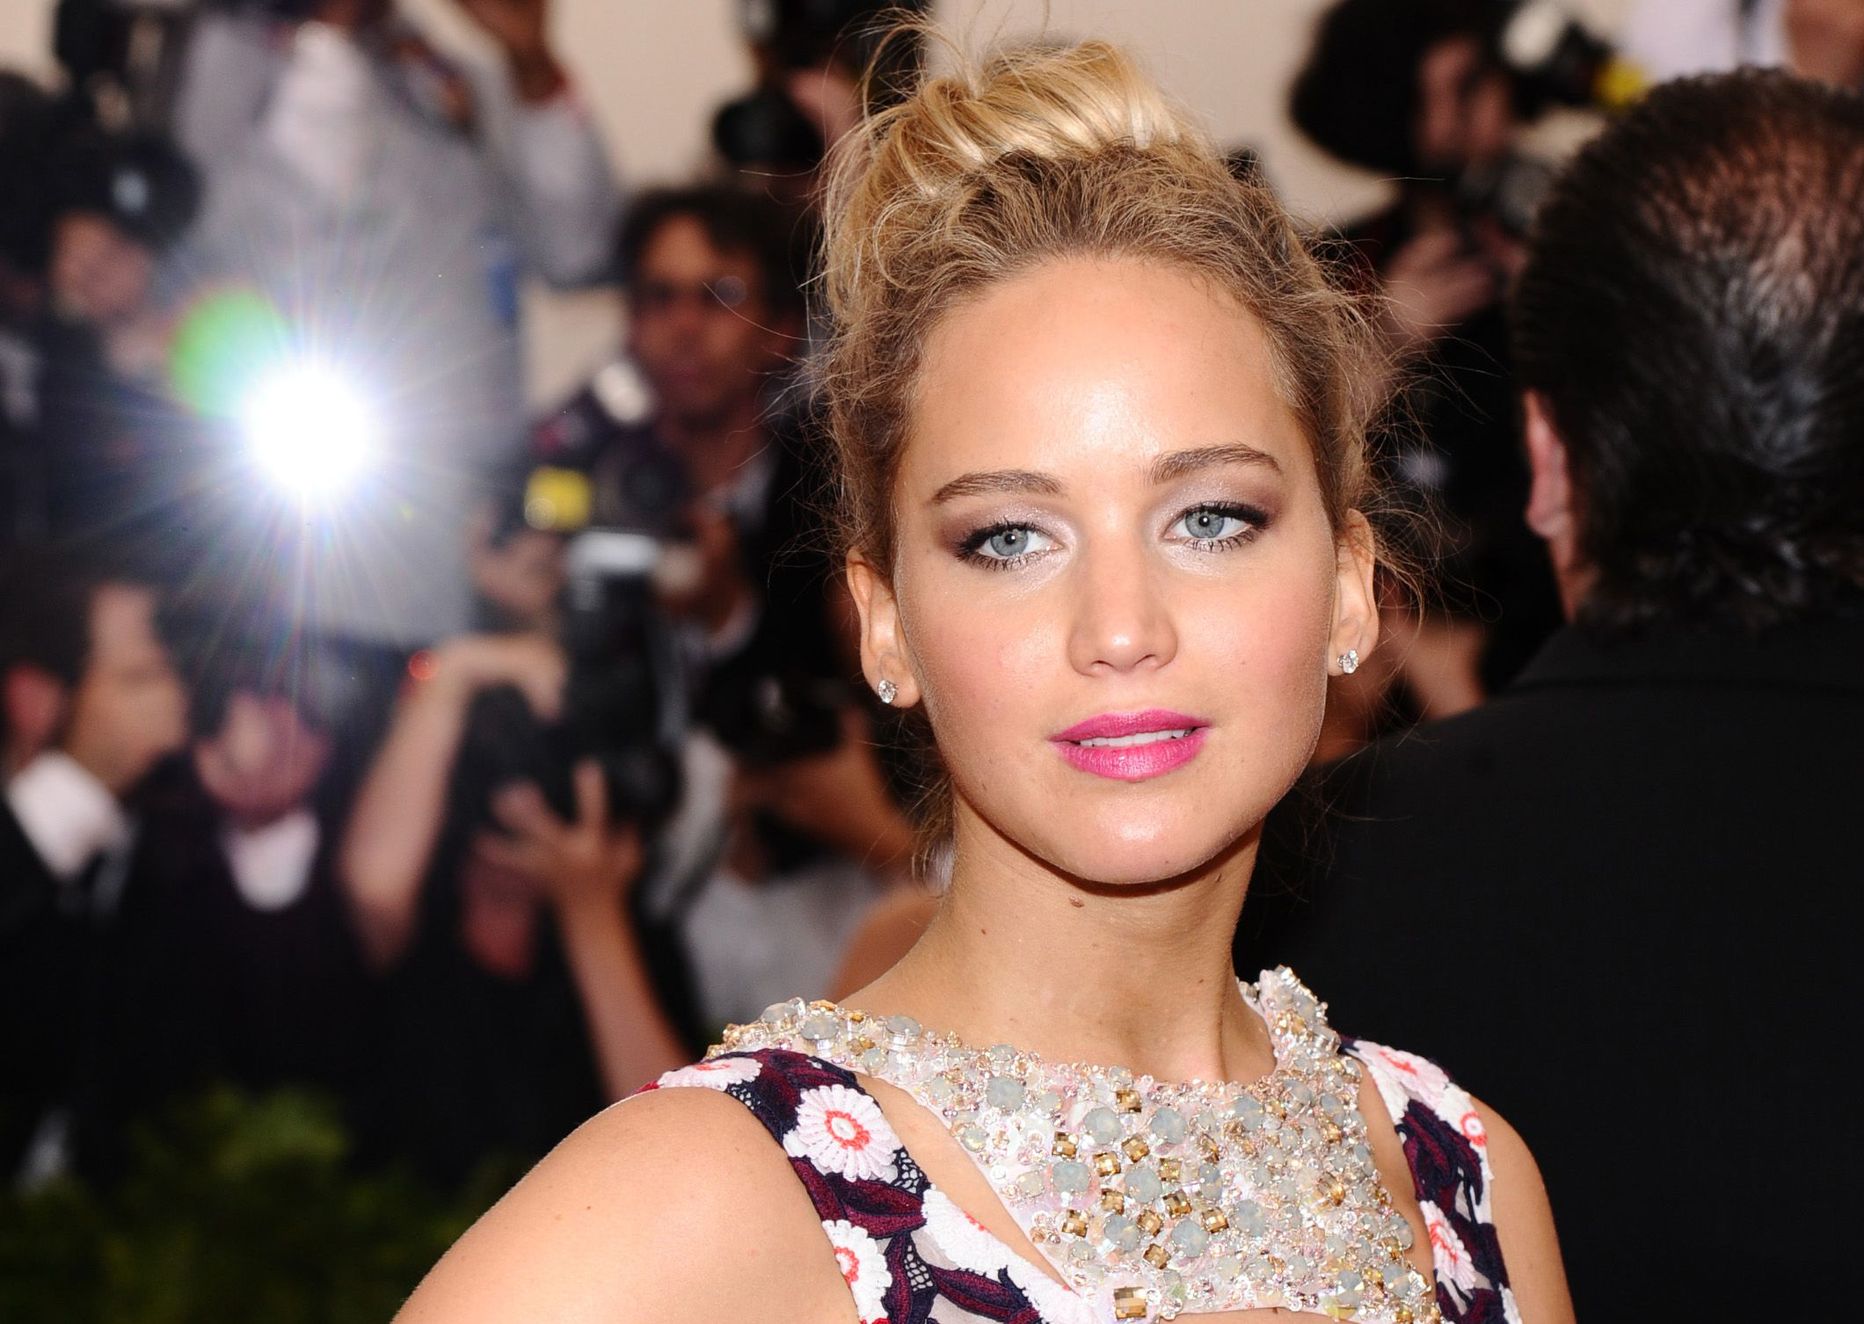 Jennifer Lawrence arrives at The Metropolitan Museum of Art's Costume Institute benefit gala celebrating "China: Through the Looking Glass" on Monday, May 4, 2015, in New York. (Photo by Charles Sykes/Invision/AP)